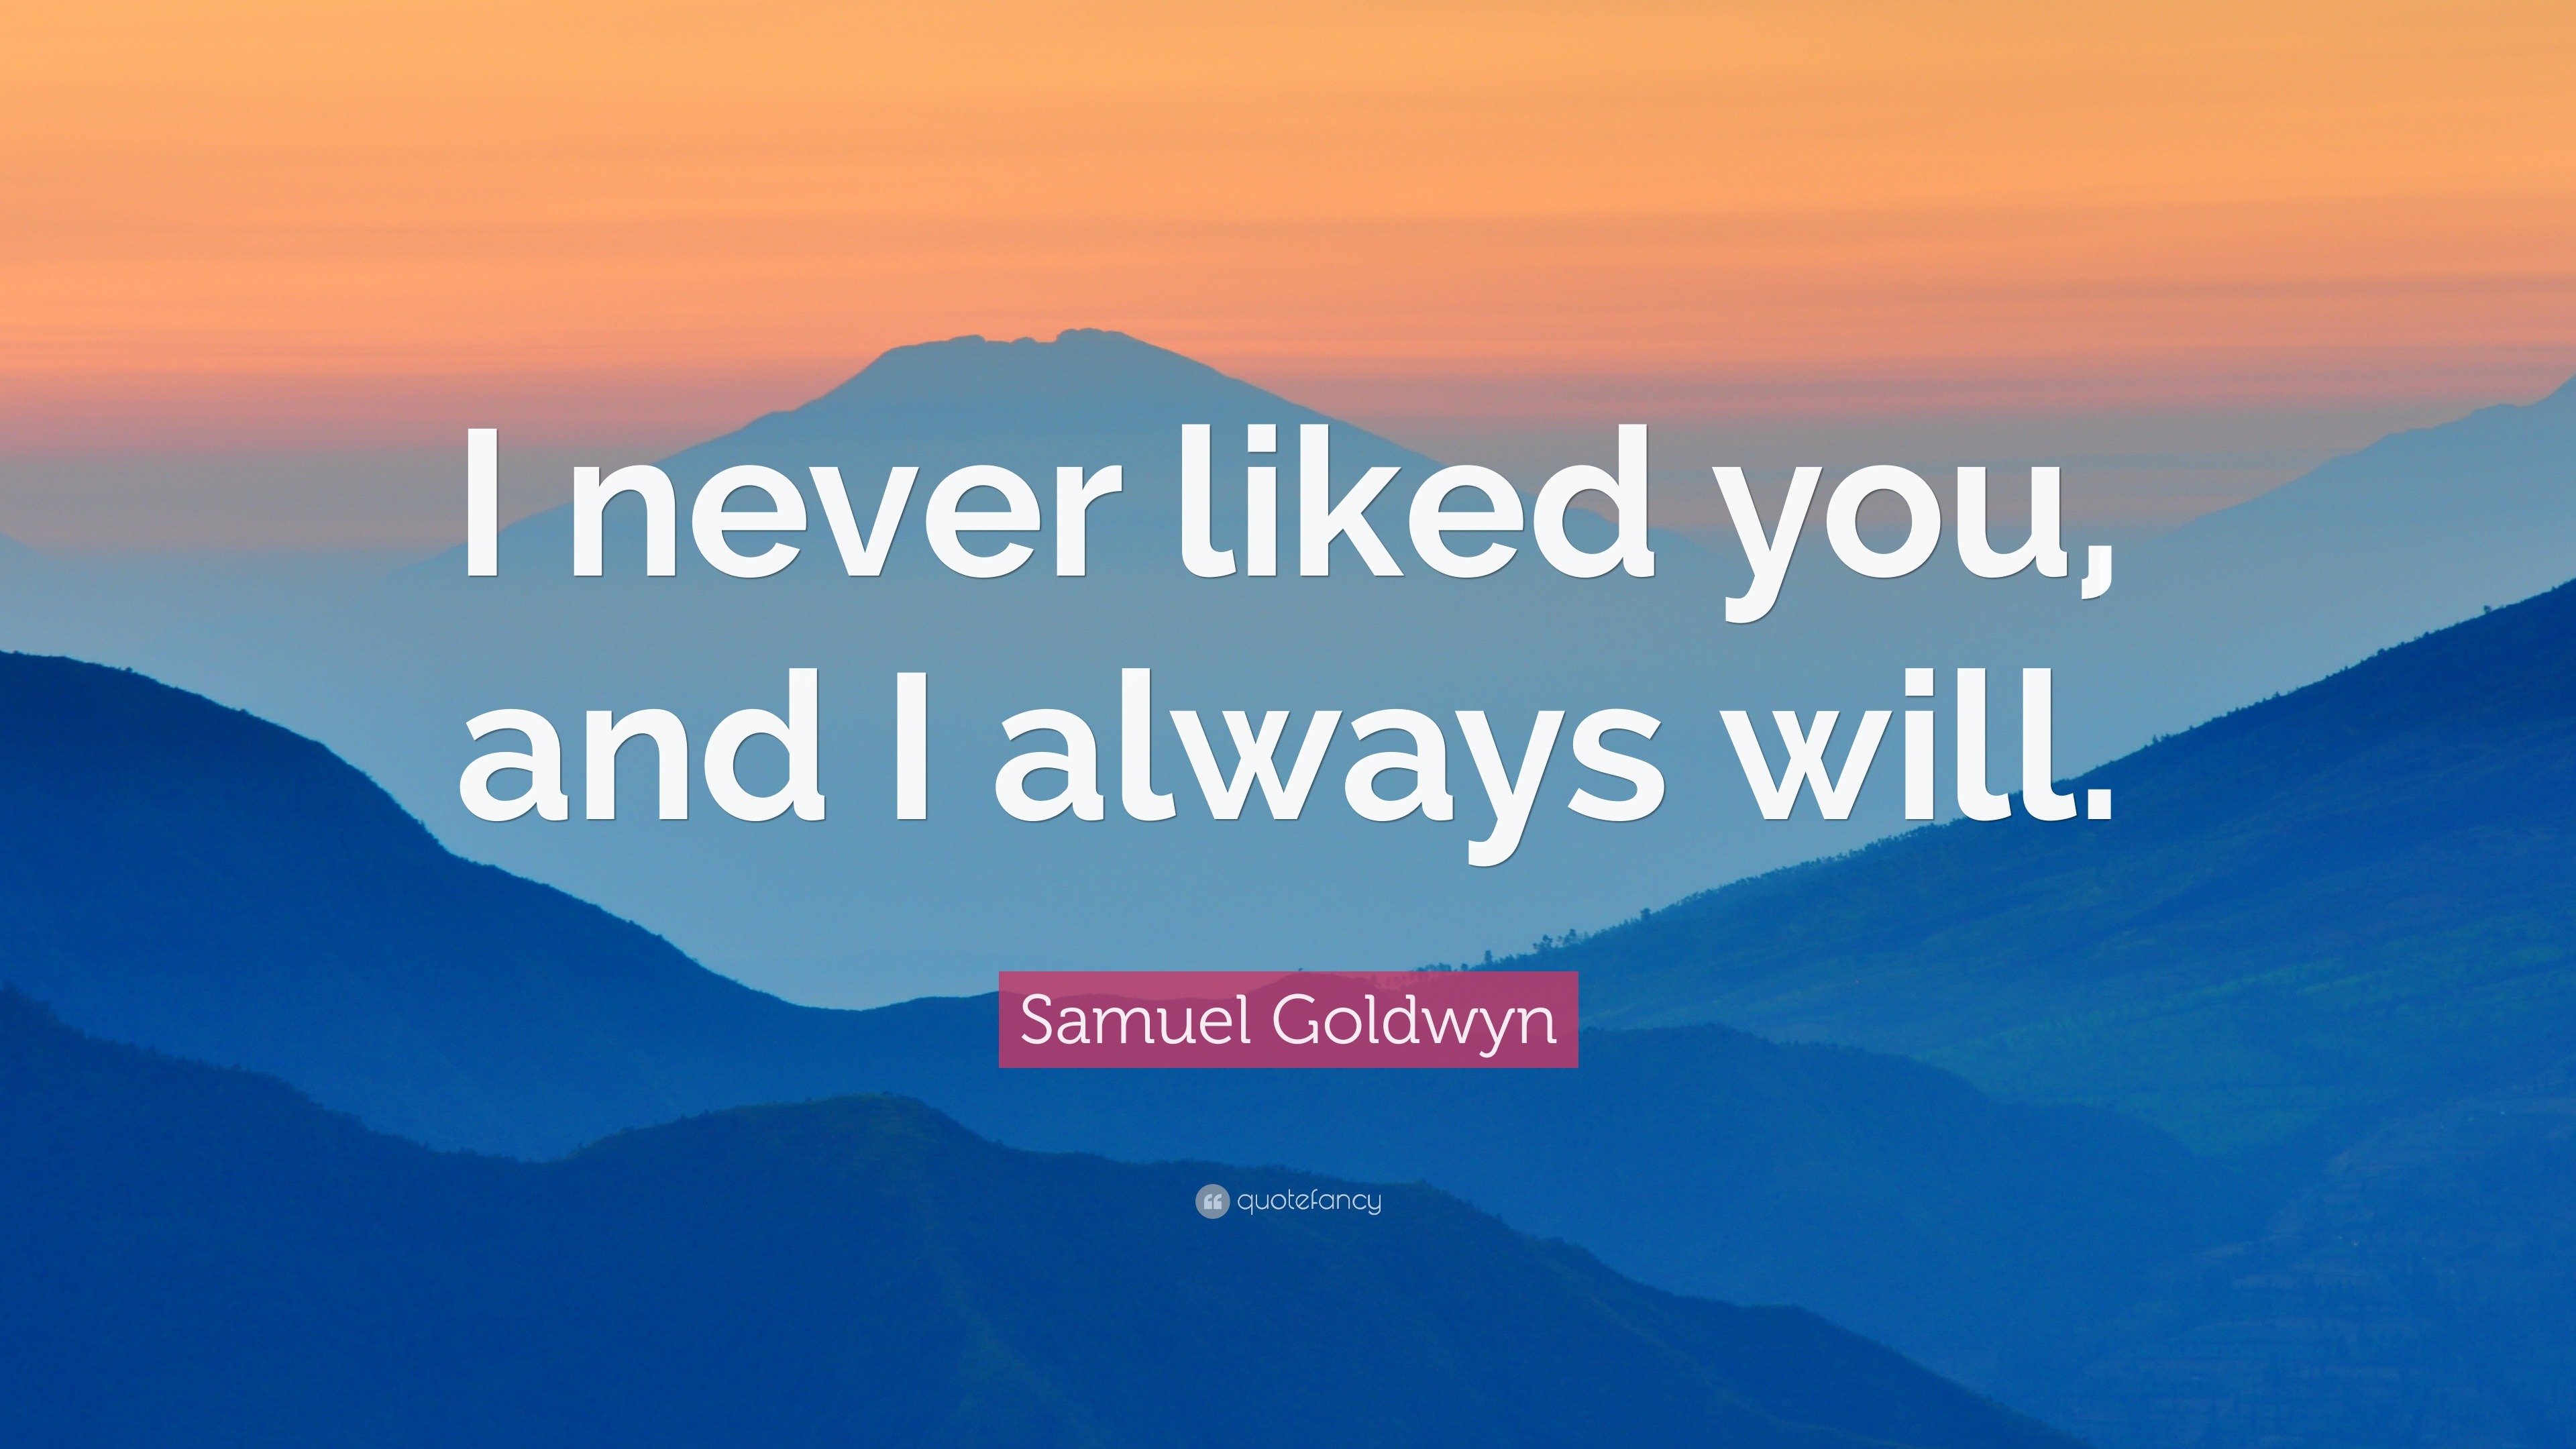 Samuel Goldwyn Quote “I never liked you, and I always will.”